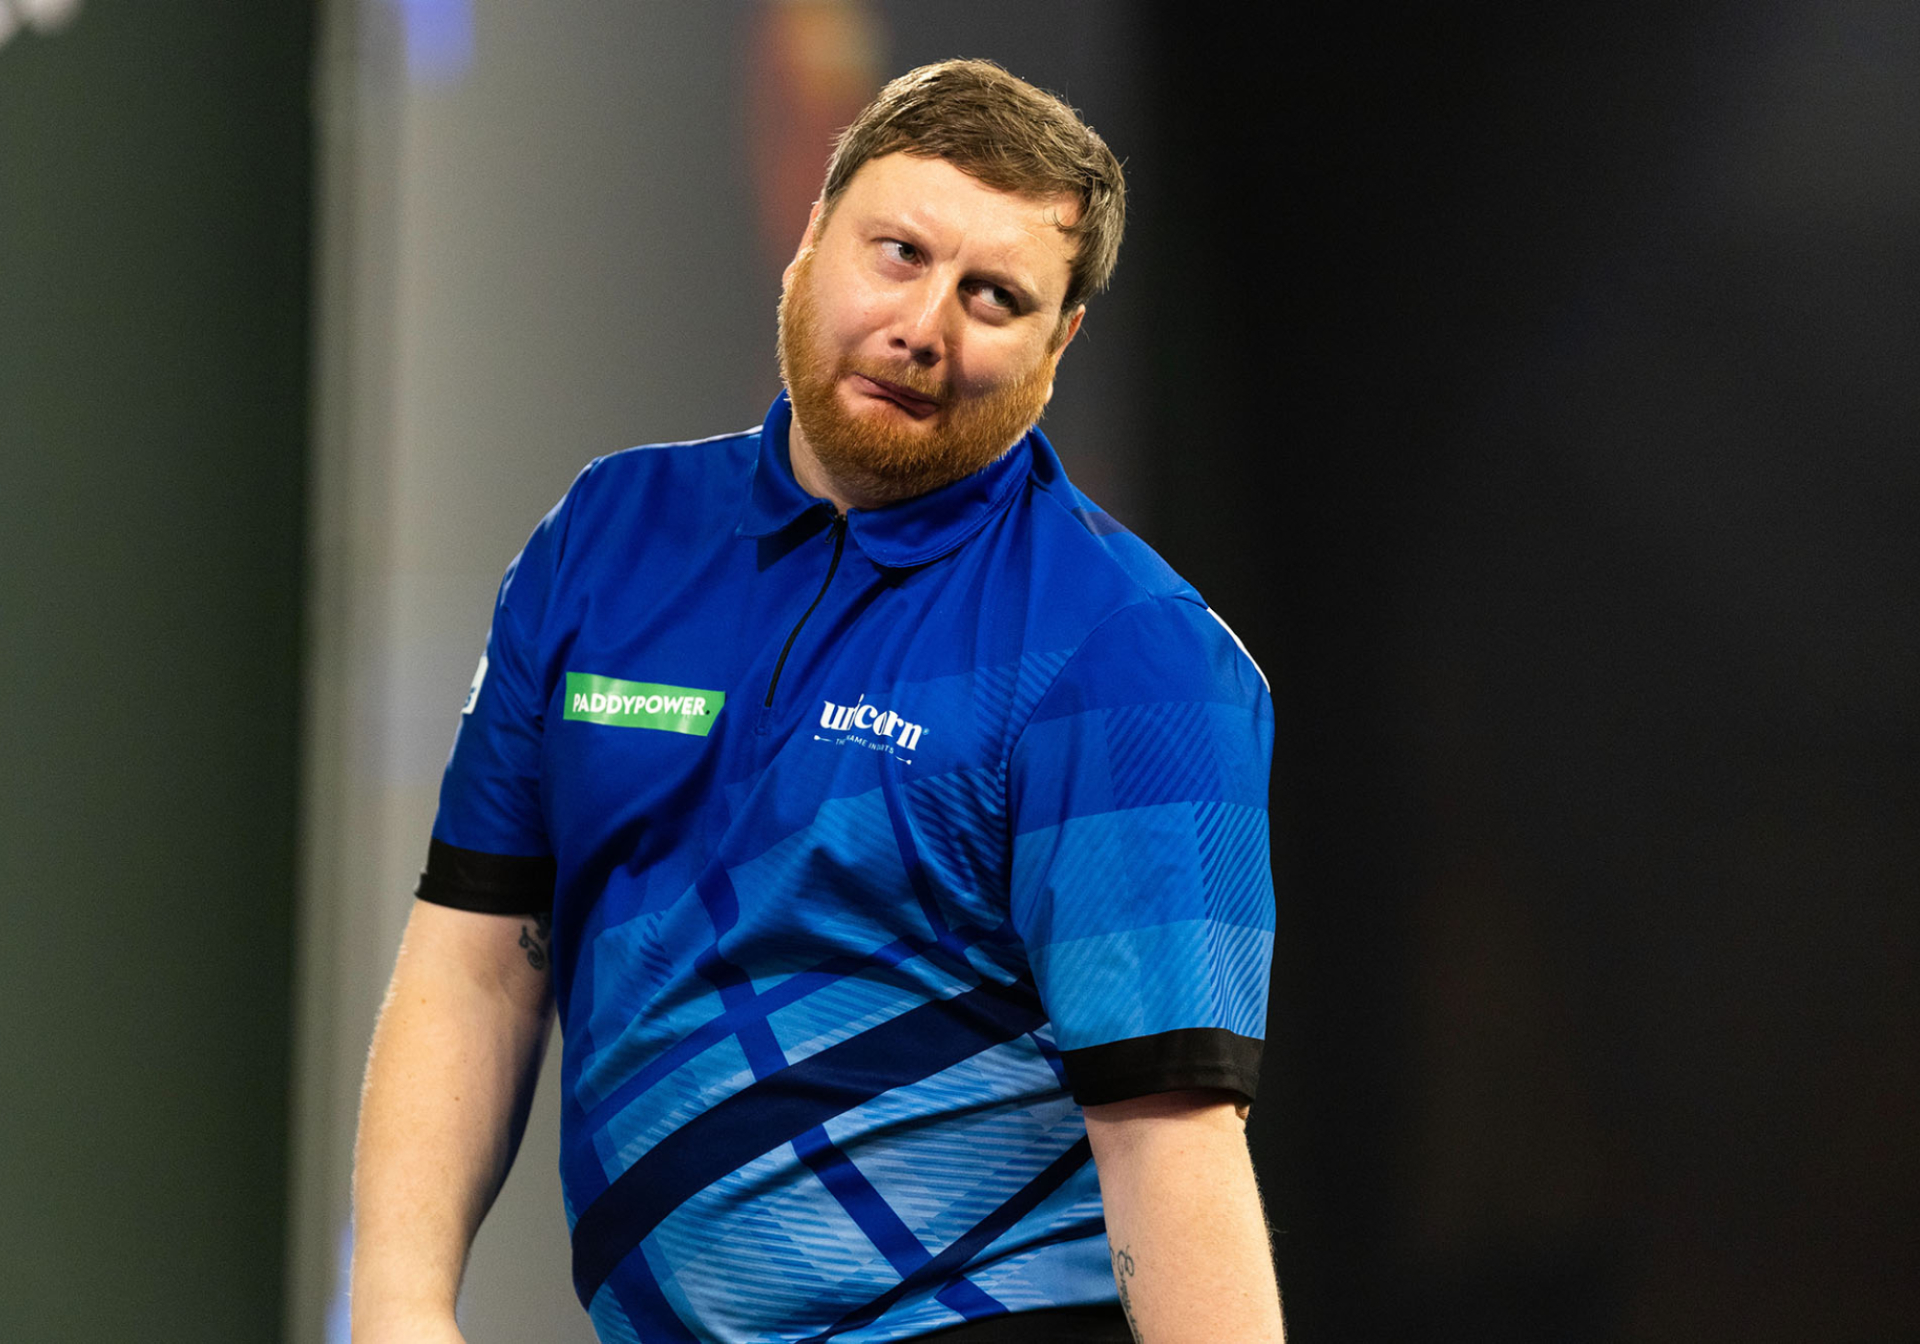 Anderson demolishes Whitlock to open title challenge at Ally Pally | PDC